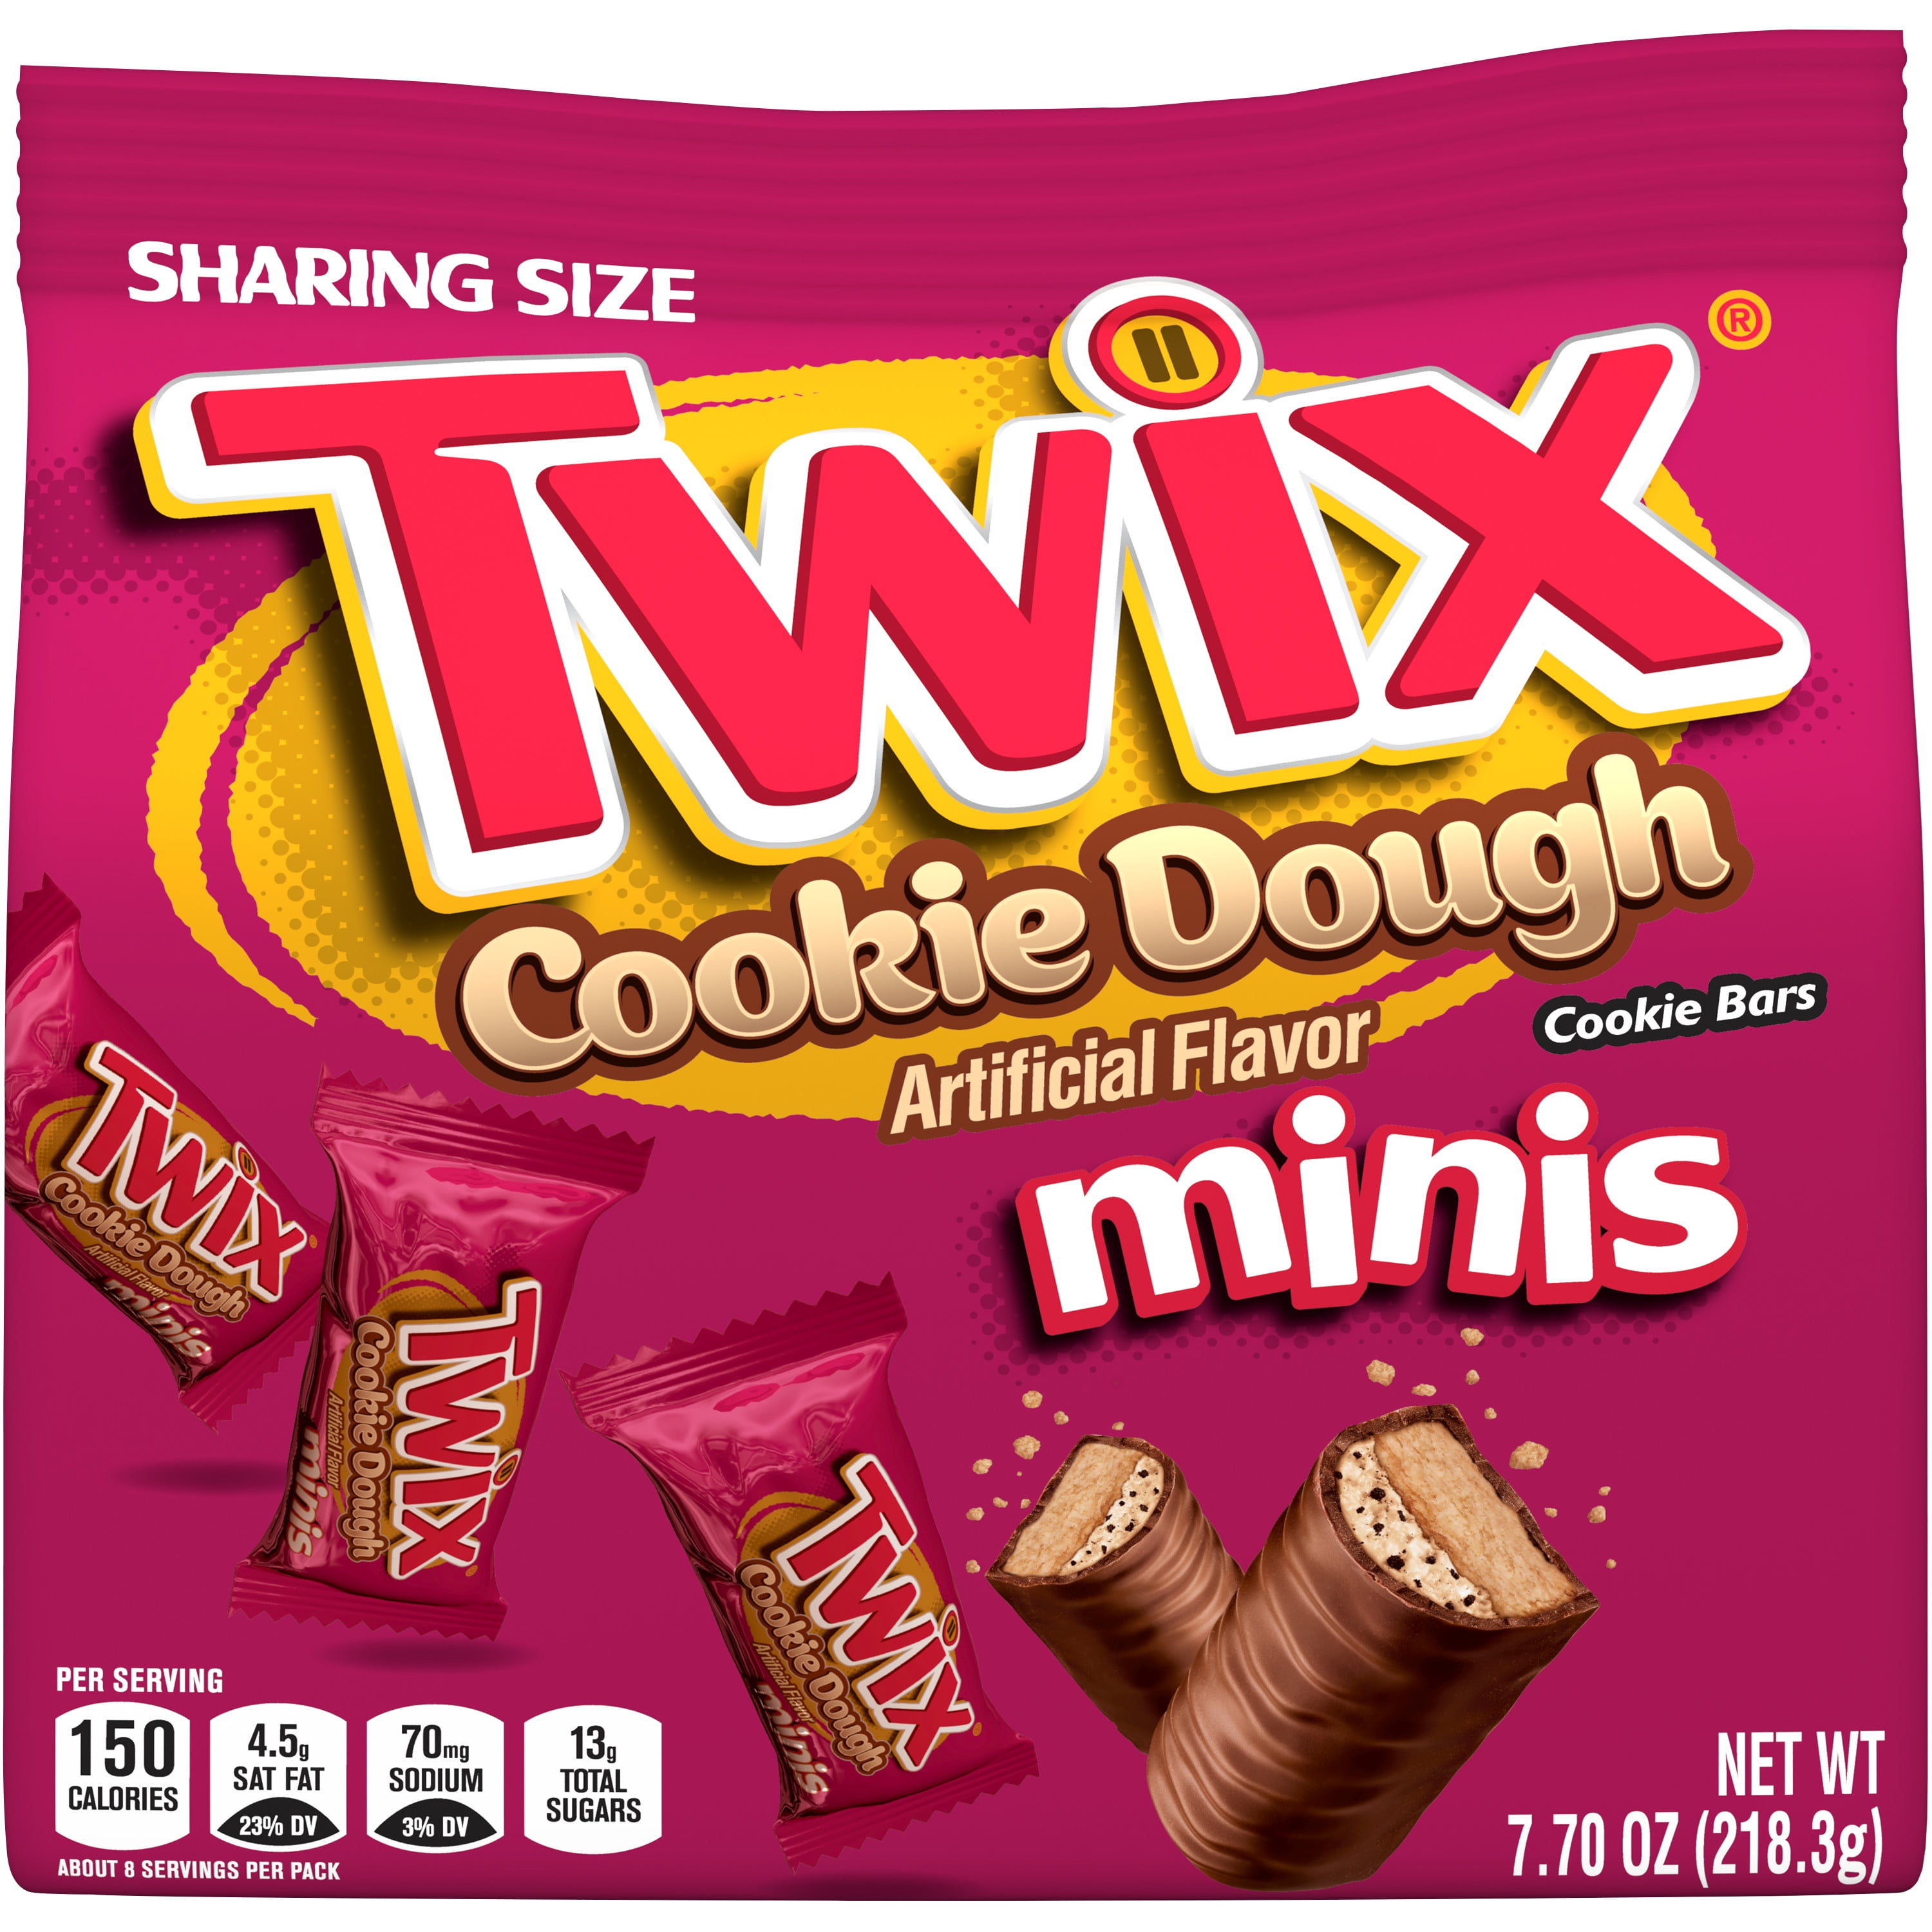 Buy Twix Chocolate Bar, 58 g Online at Best Prices